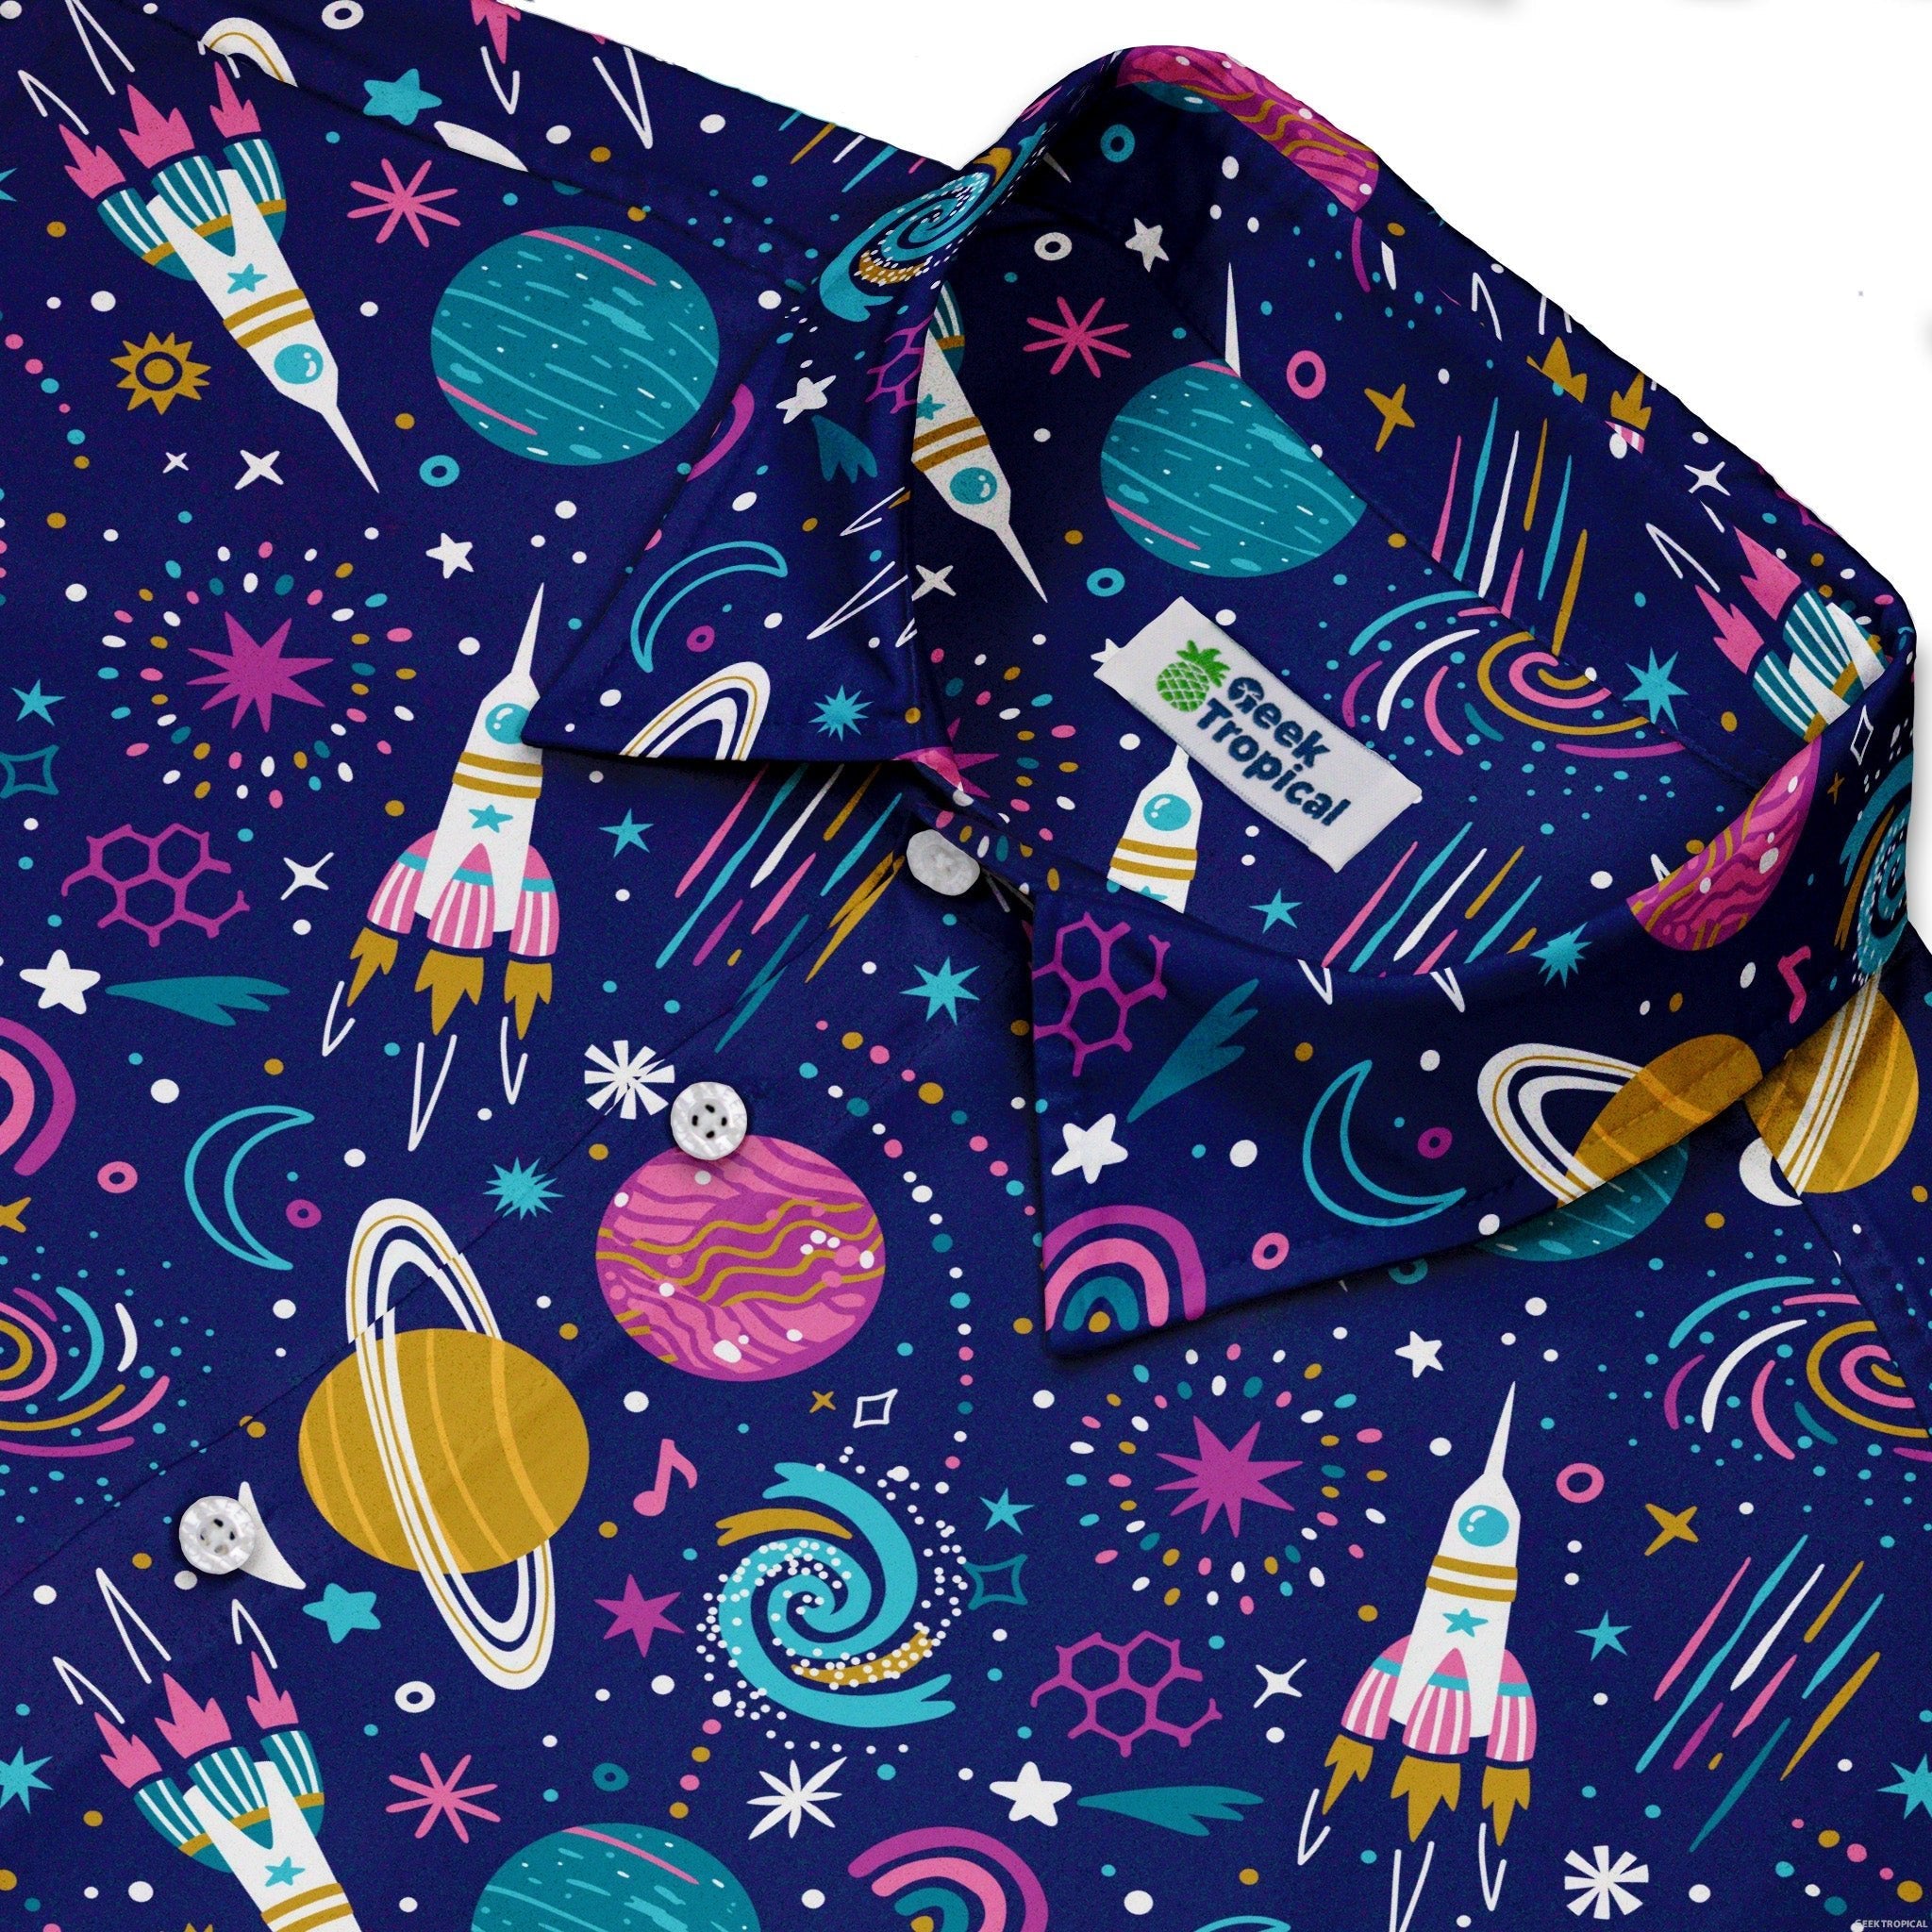 Cosmic Cute Outer Space Button Up Shirt - adult sizing - Maximalist Patterns - outer space & astronaut print